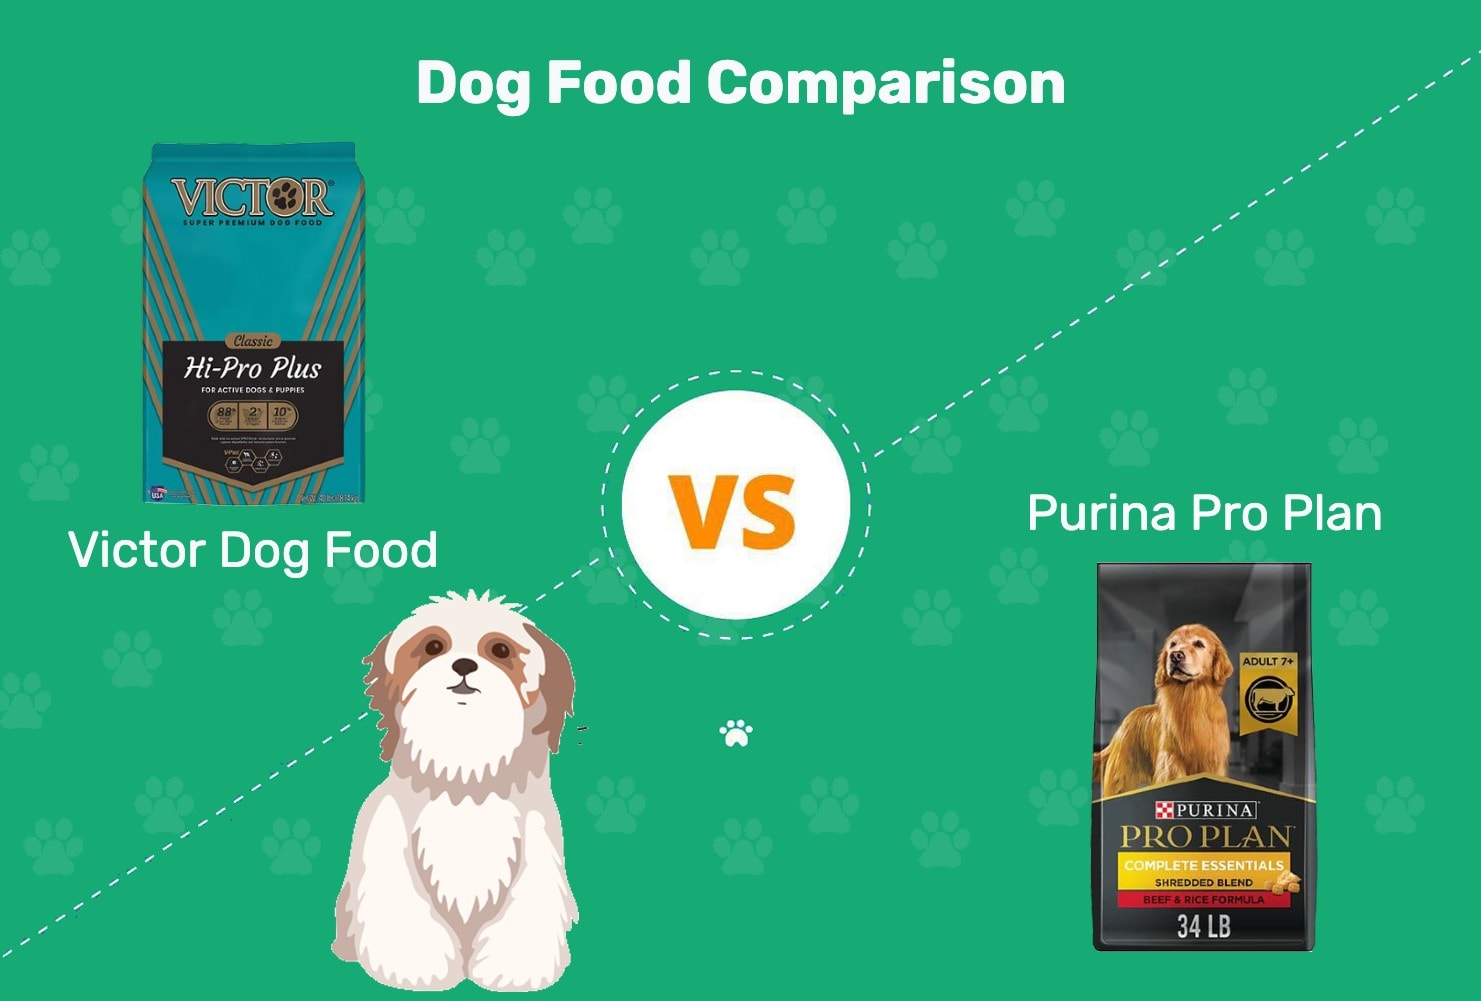 Victor Dog Food Vs Purina Pro Plan : Which is the Best?